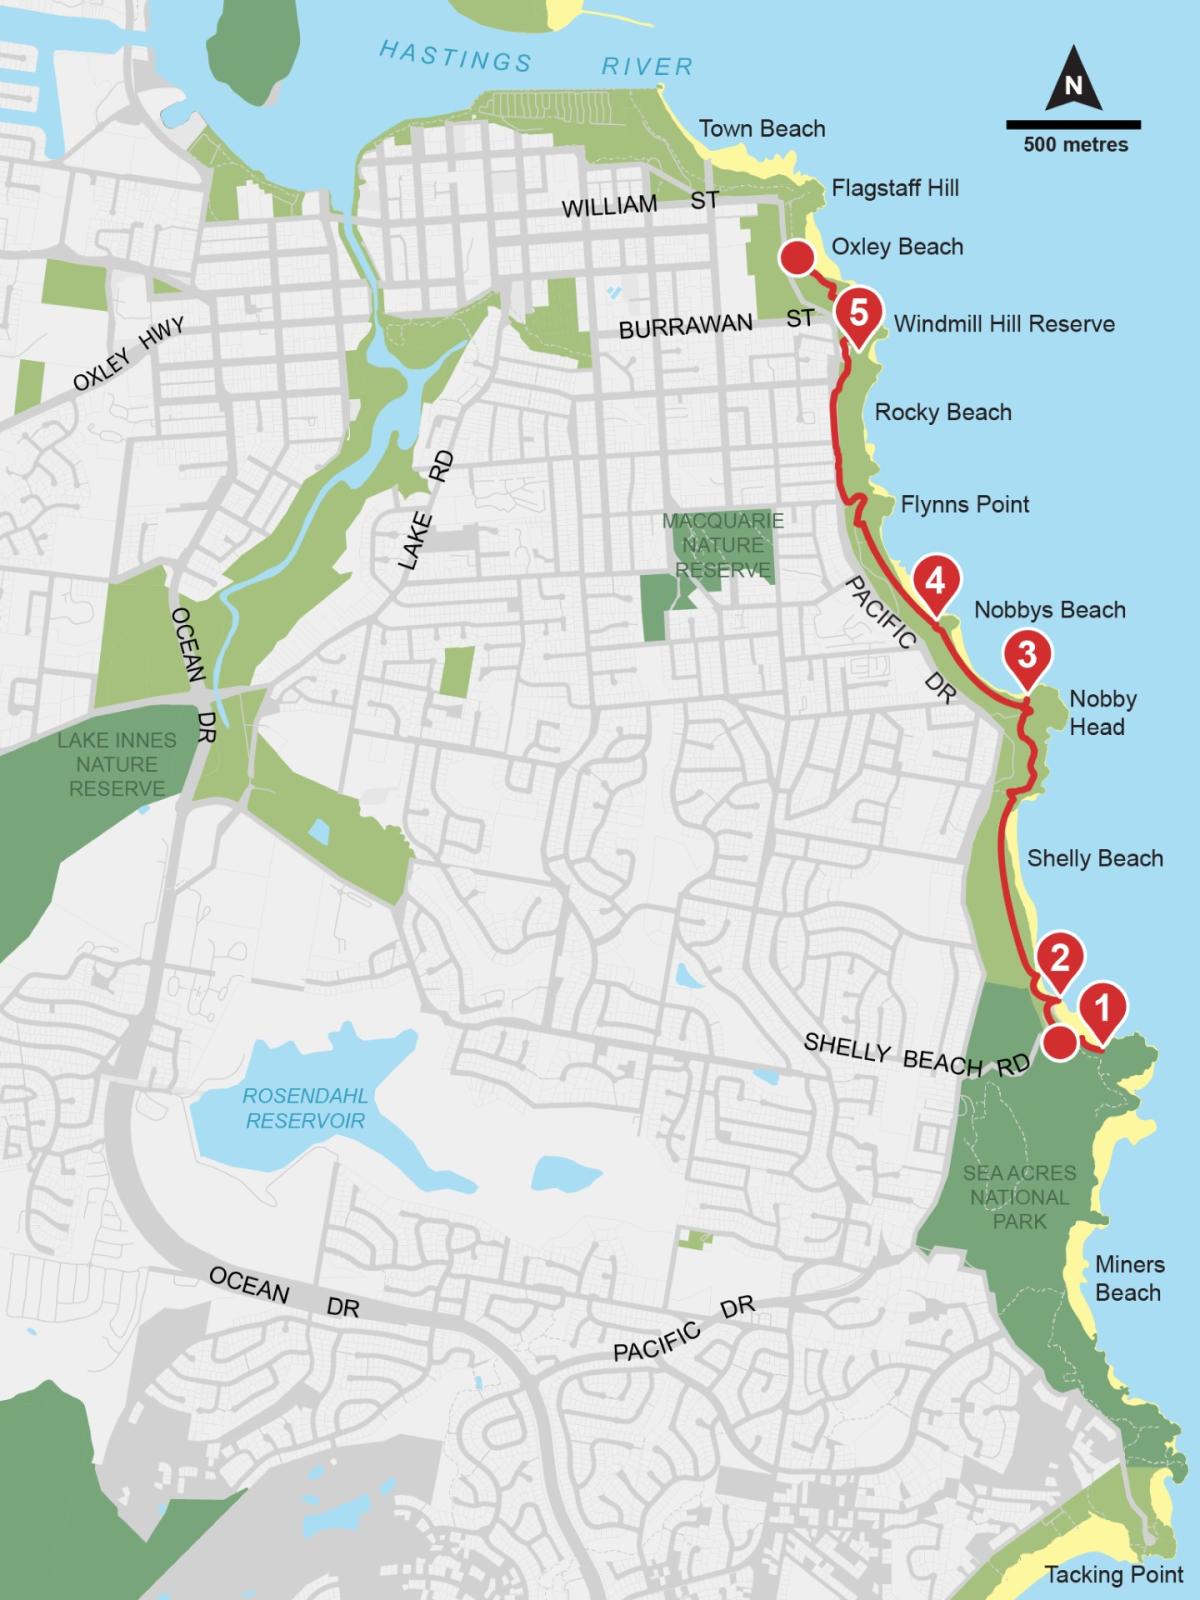 Map of the Port Macquarie geotrail